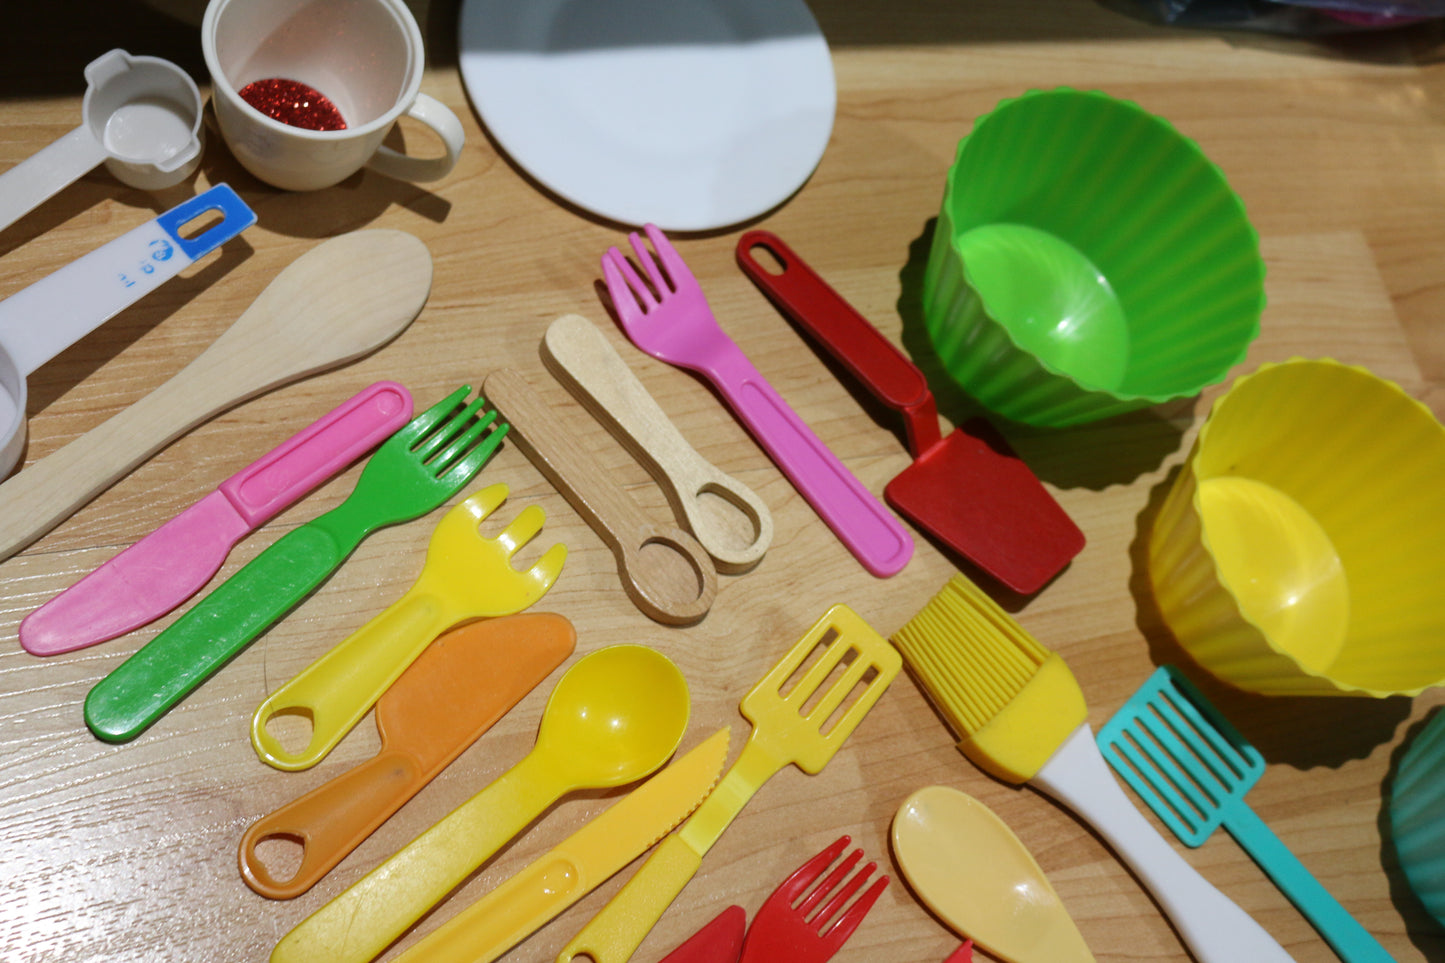 Play Dishes Mixed Lot Played kitchen toys for kids lot of ustensils W Condition